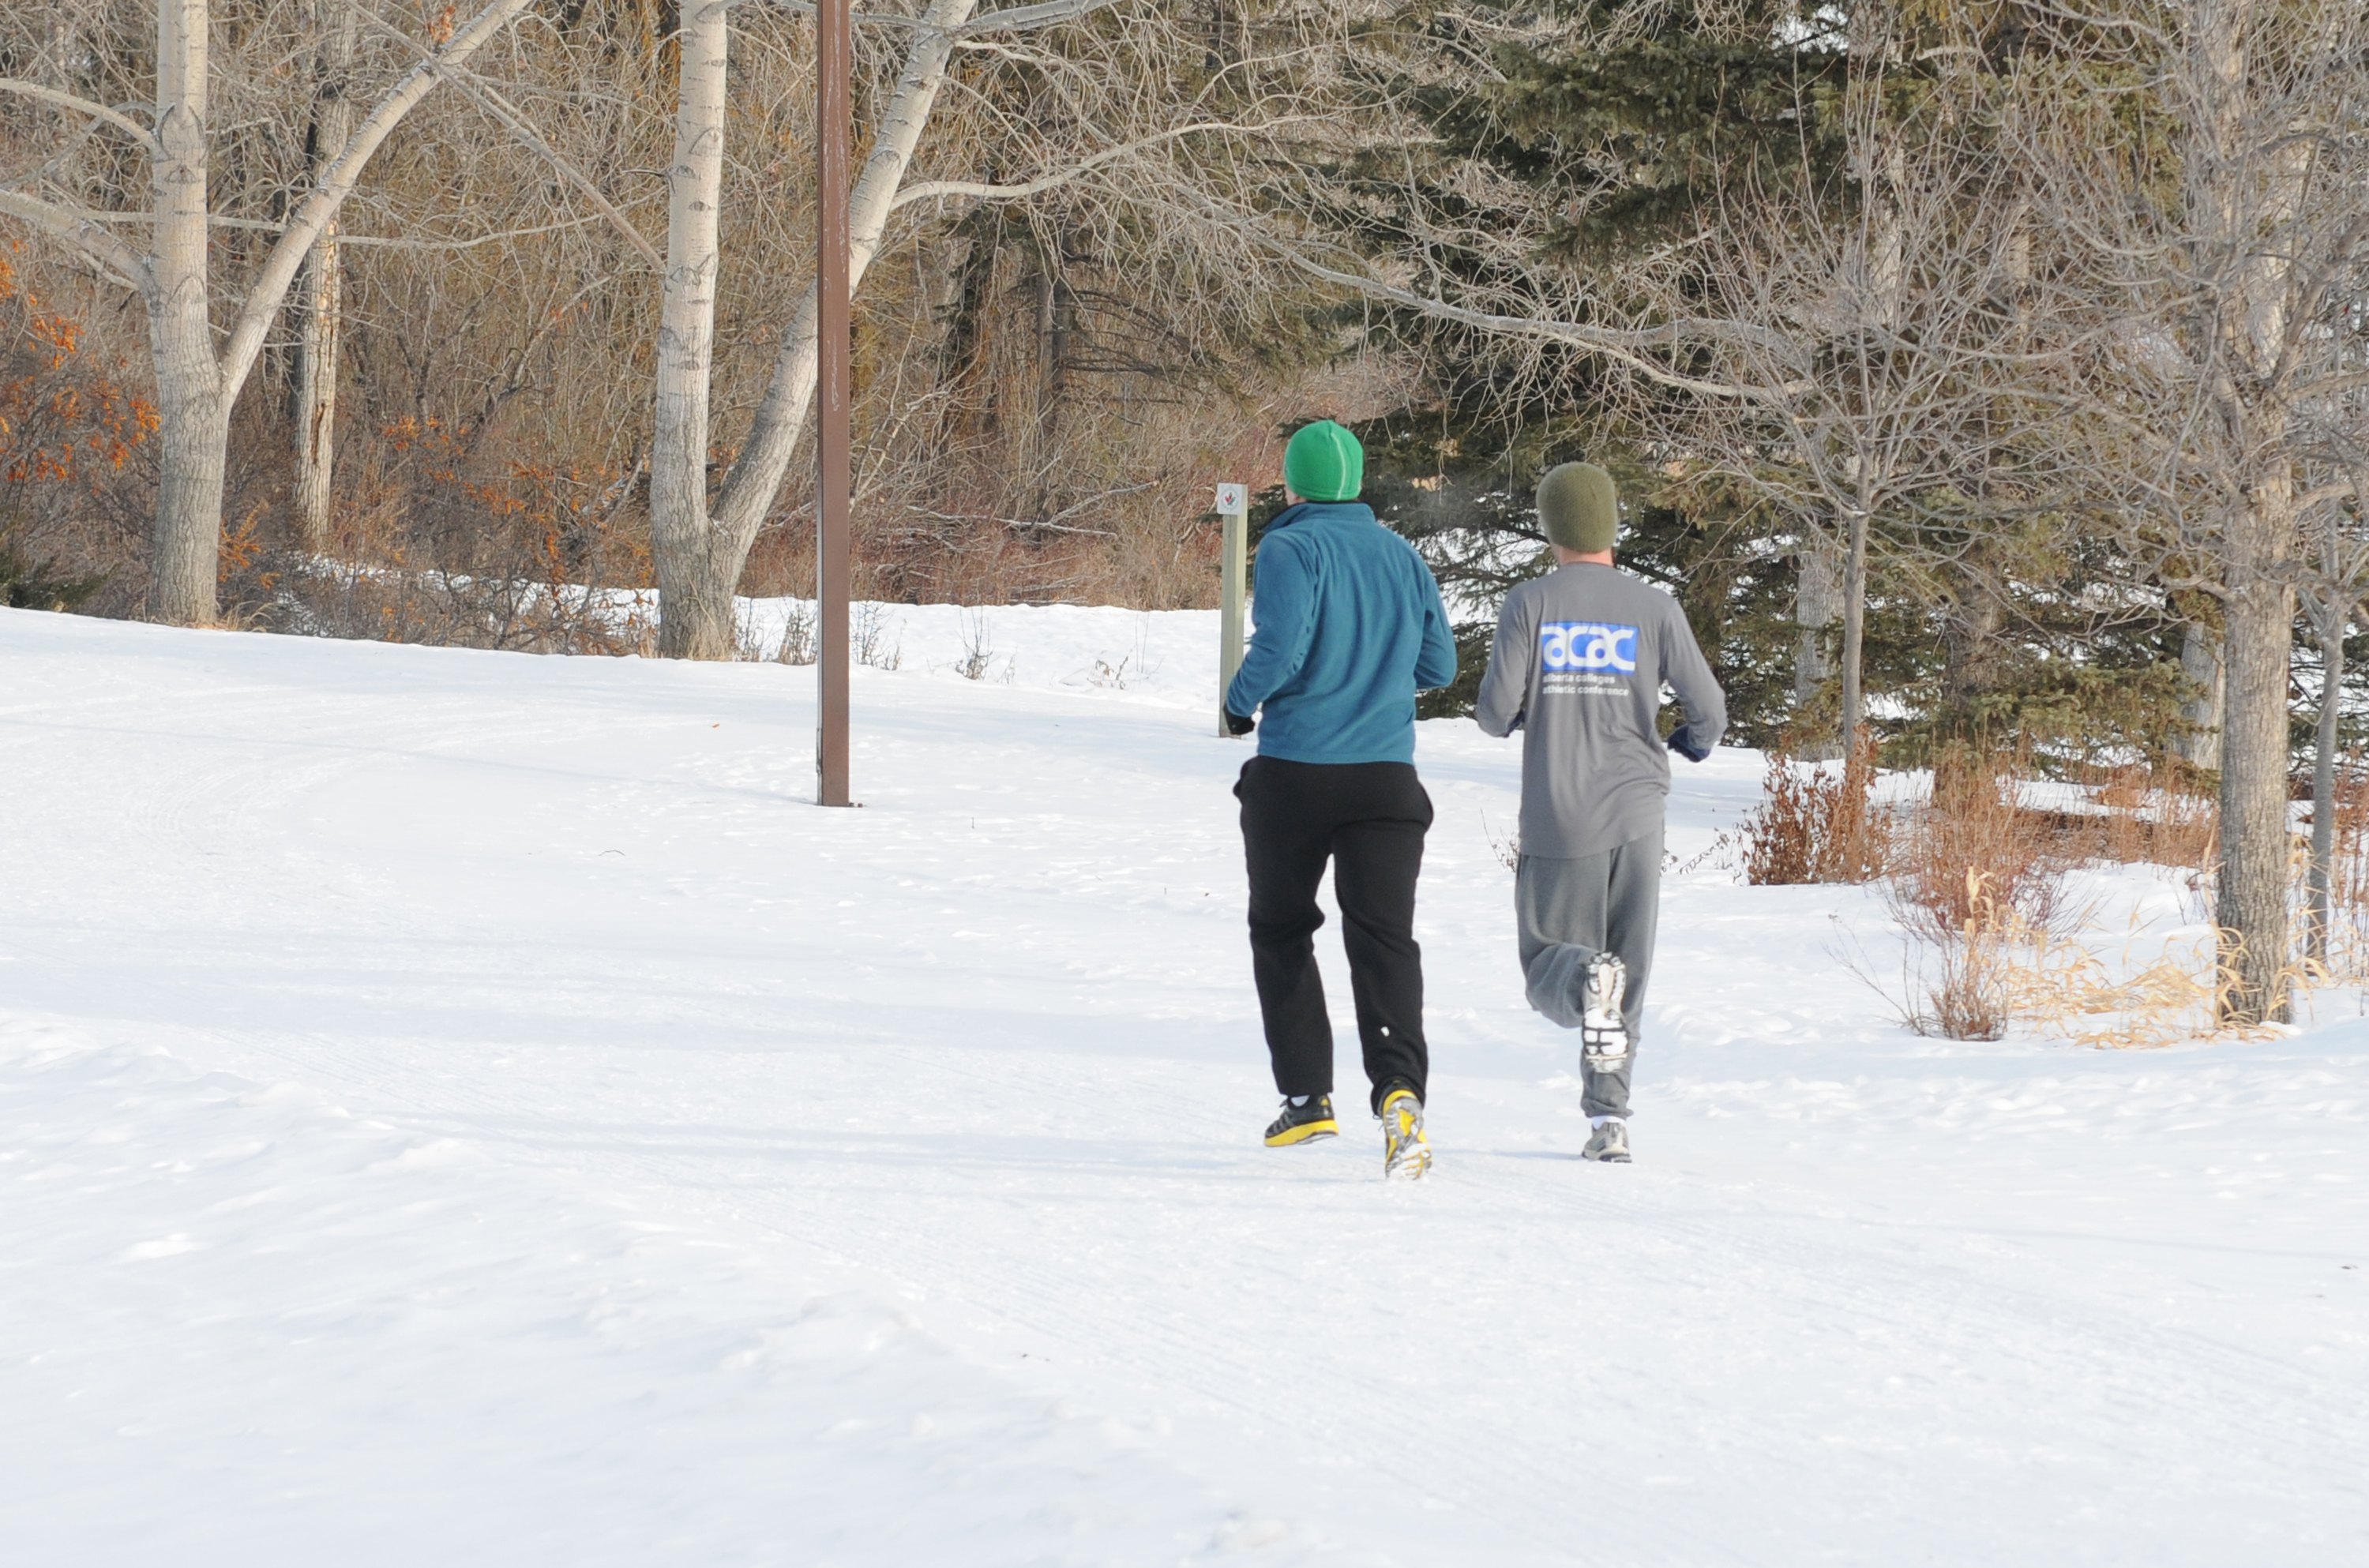 QUICK JOG- Two joggers brave the morning cold recently as they made their way around Great Chief Park.